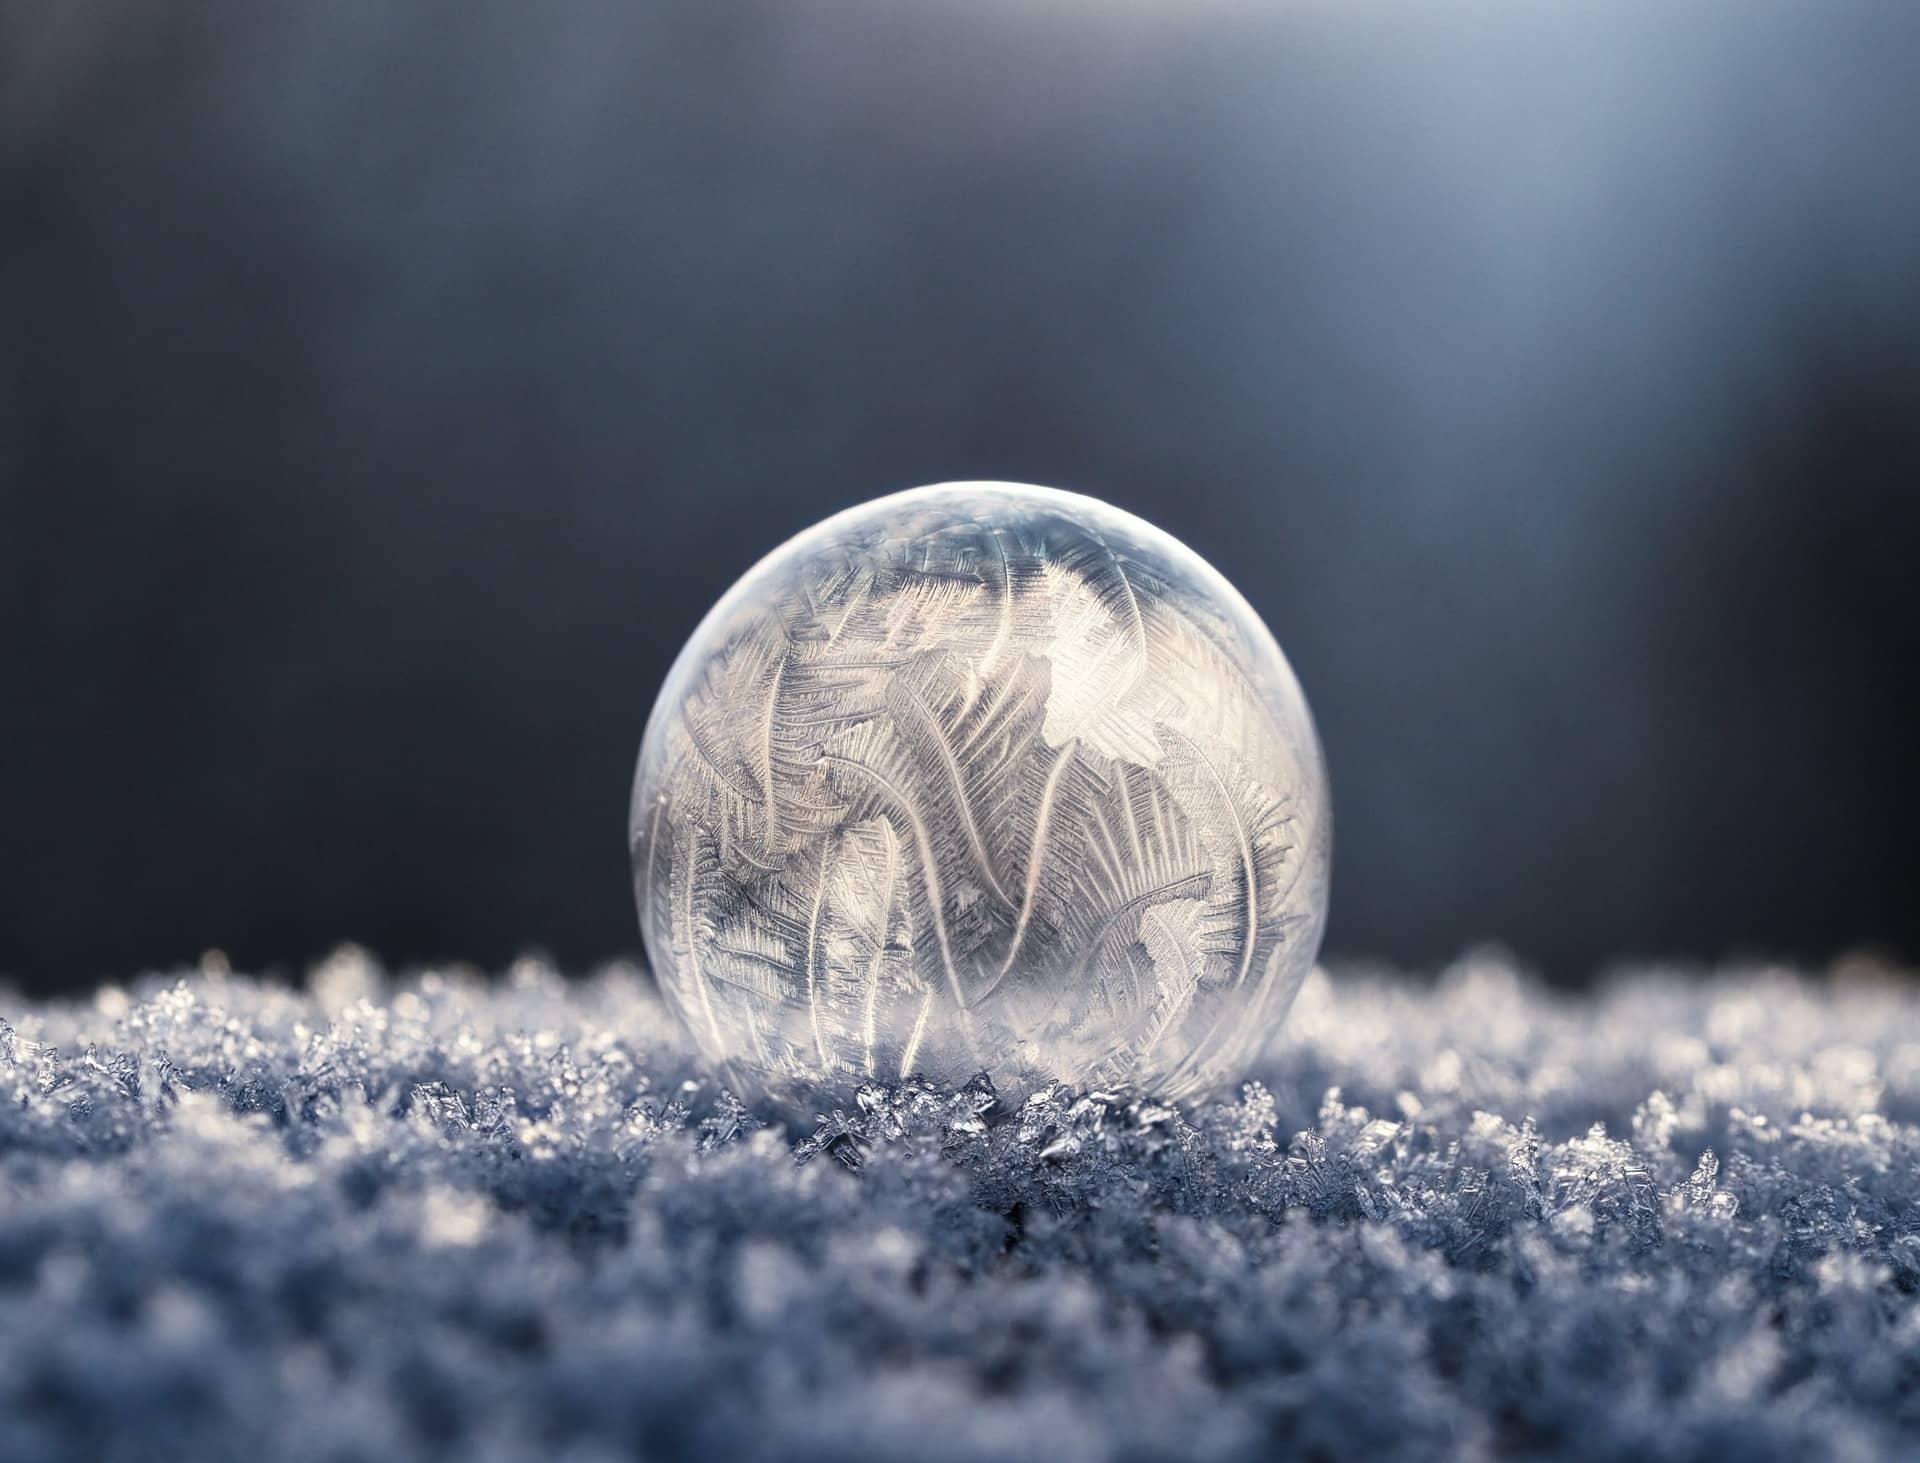 glass orb with ice designs covering it